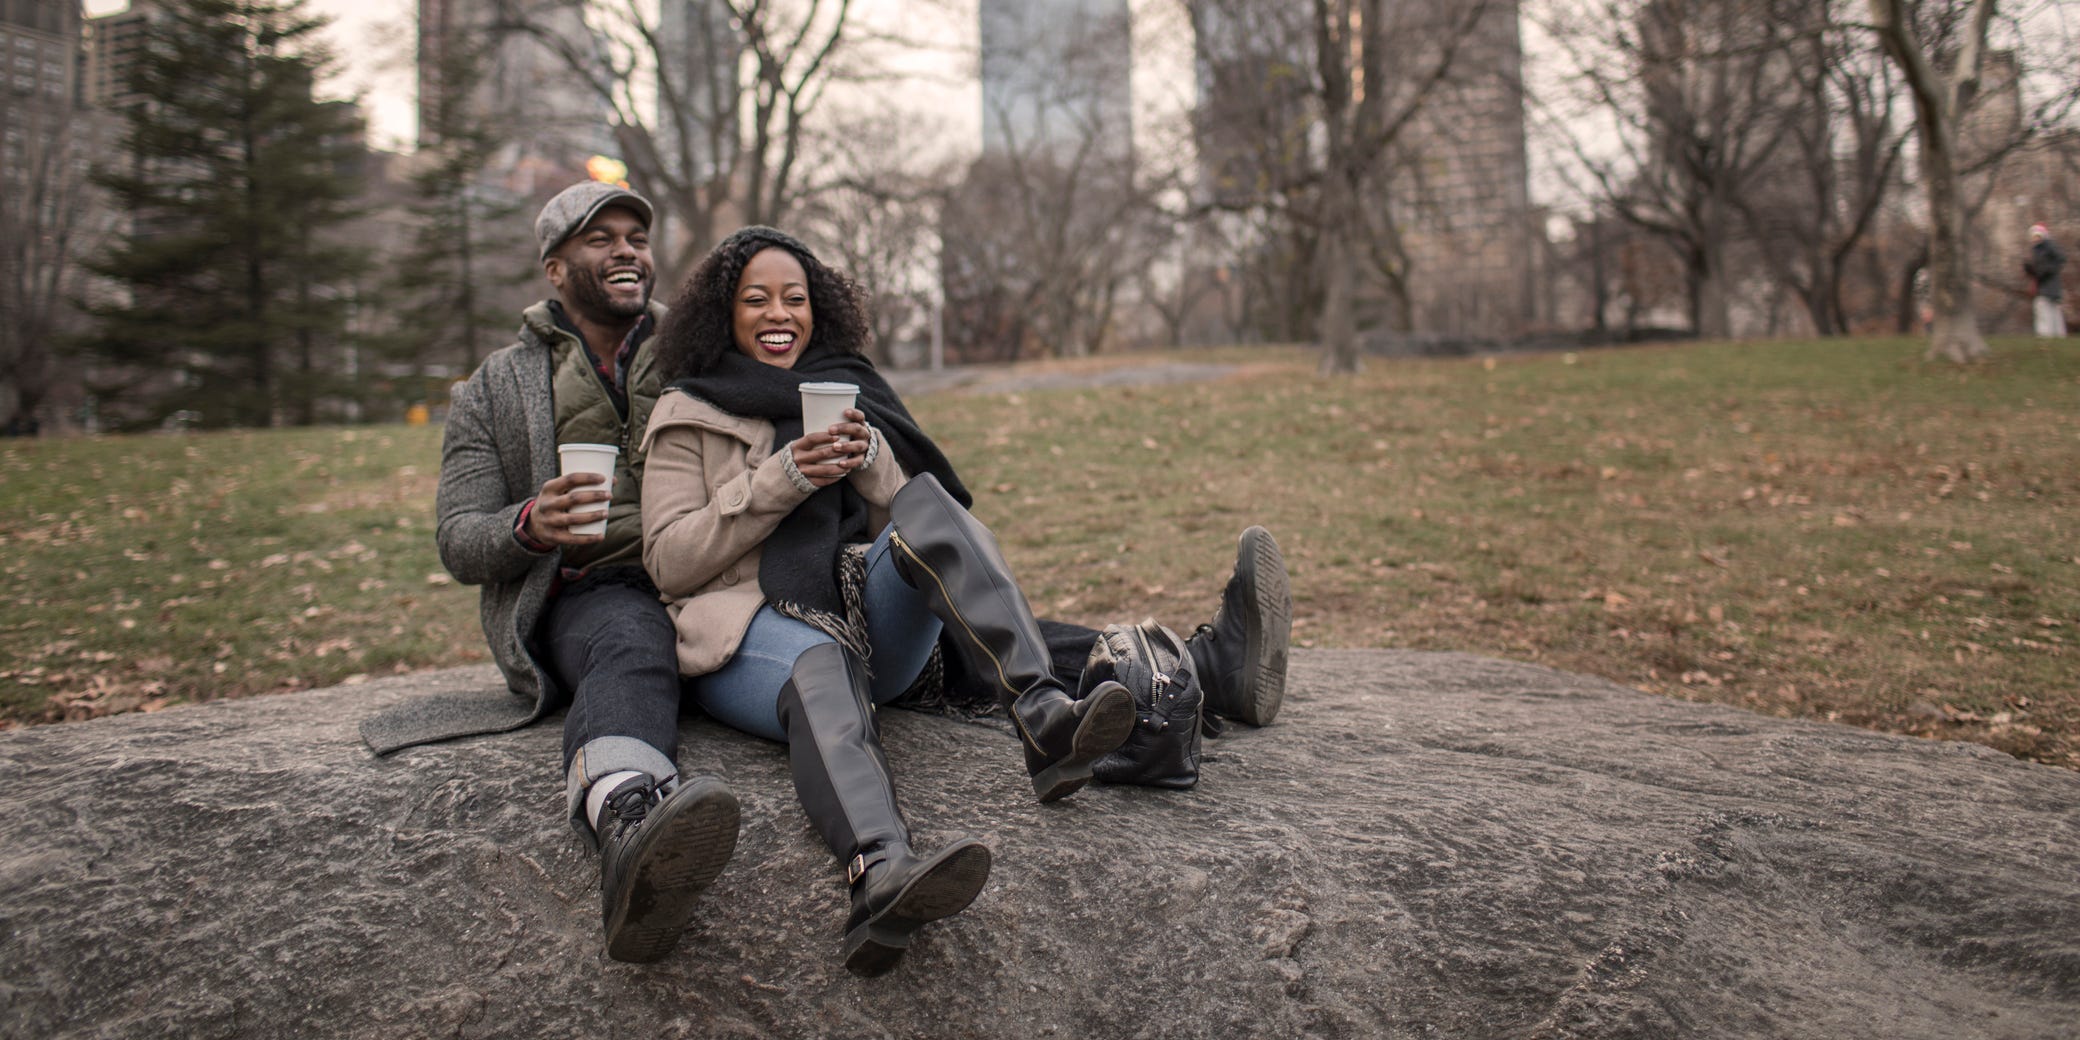 A couple sits sipping coffee in a park.